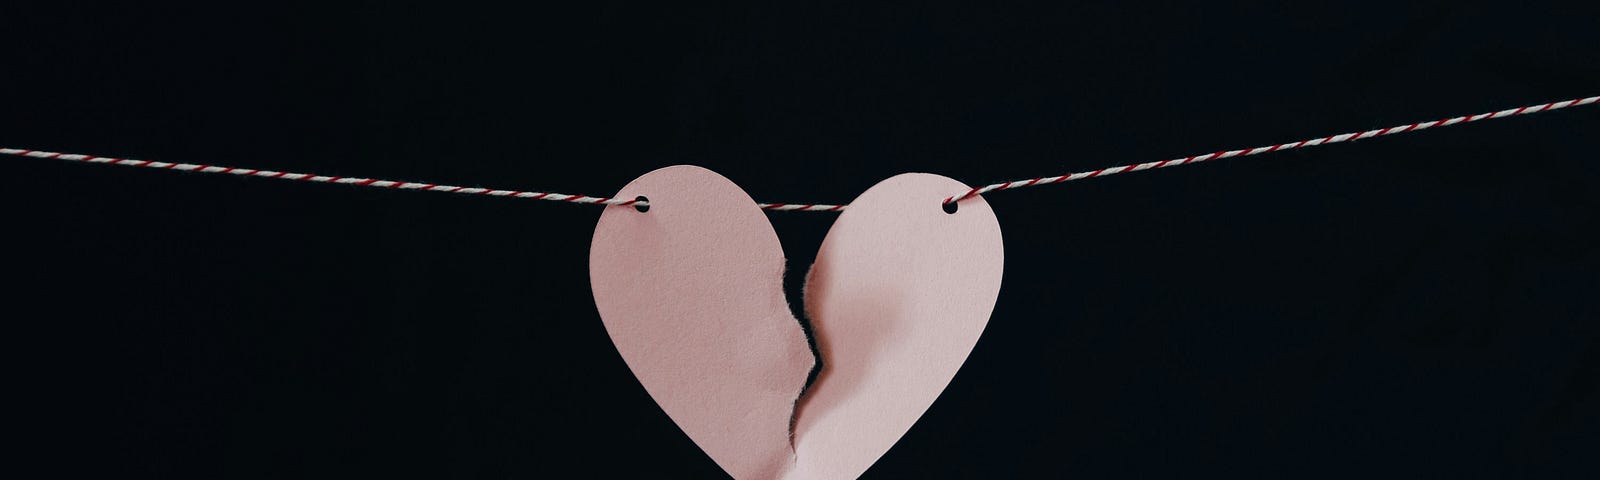 pink heart split down the middle hanging on a string